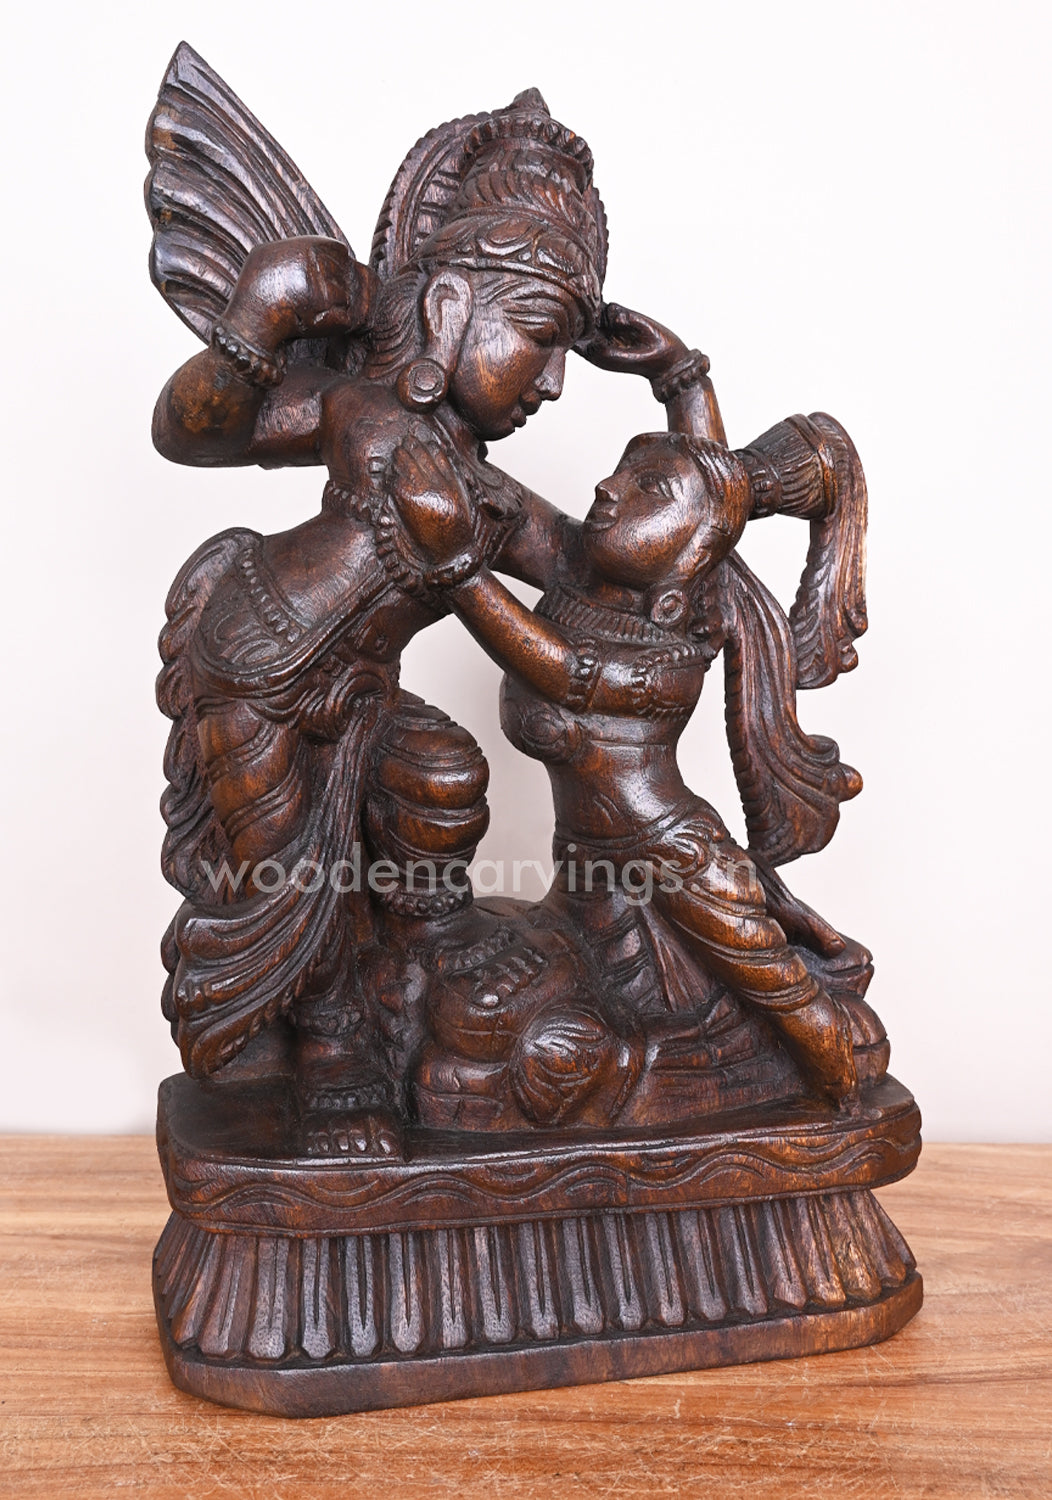 Handcrafted Beautiful Lord Krishna with Love Radha Standing Light Weight Wooden Sculpture 19'"